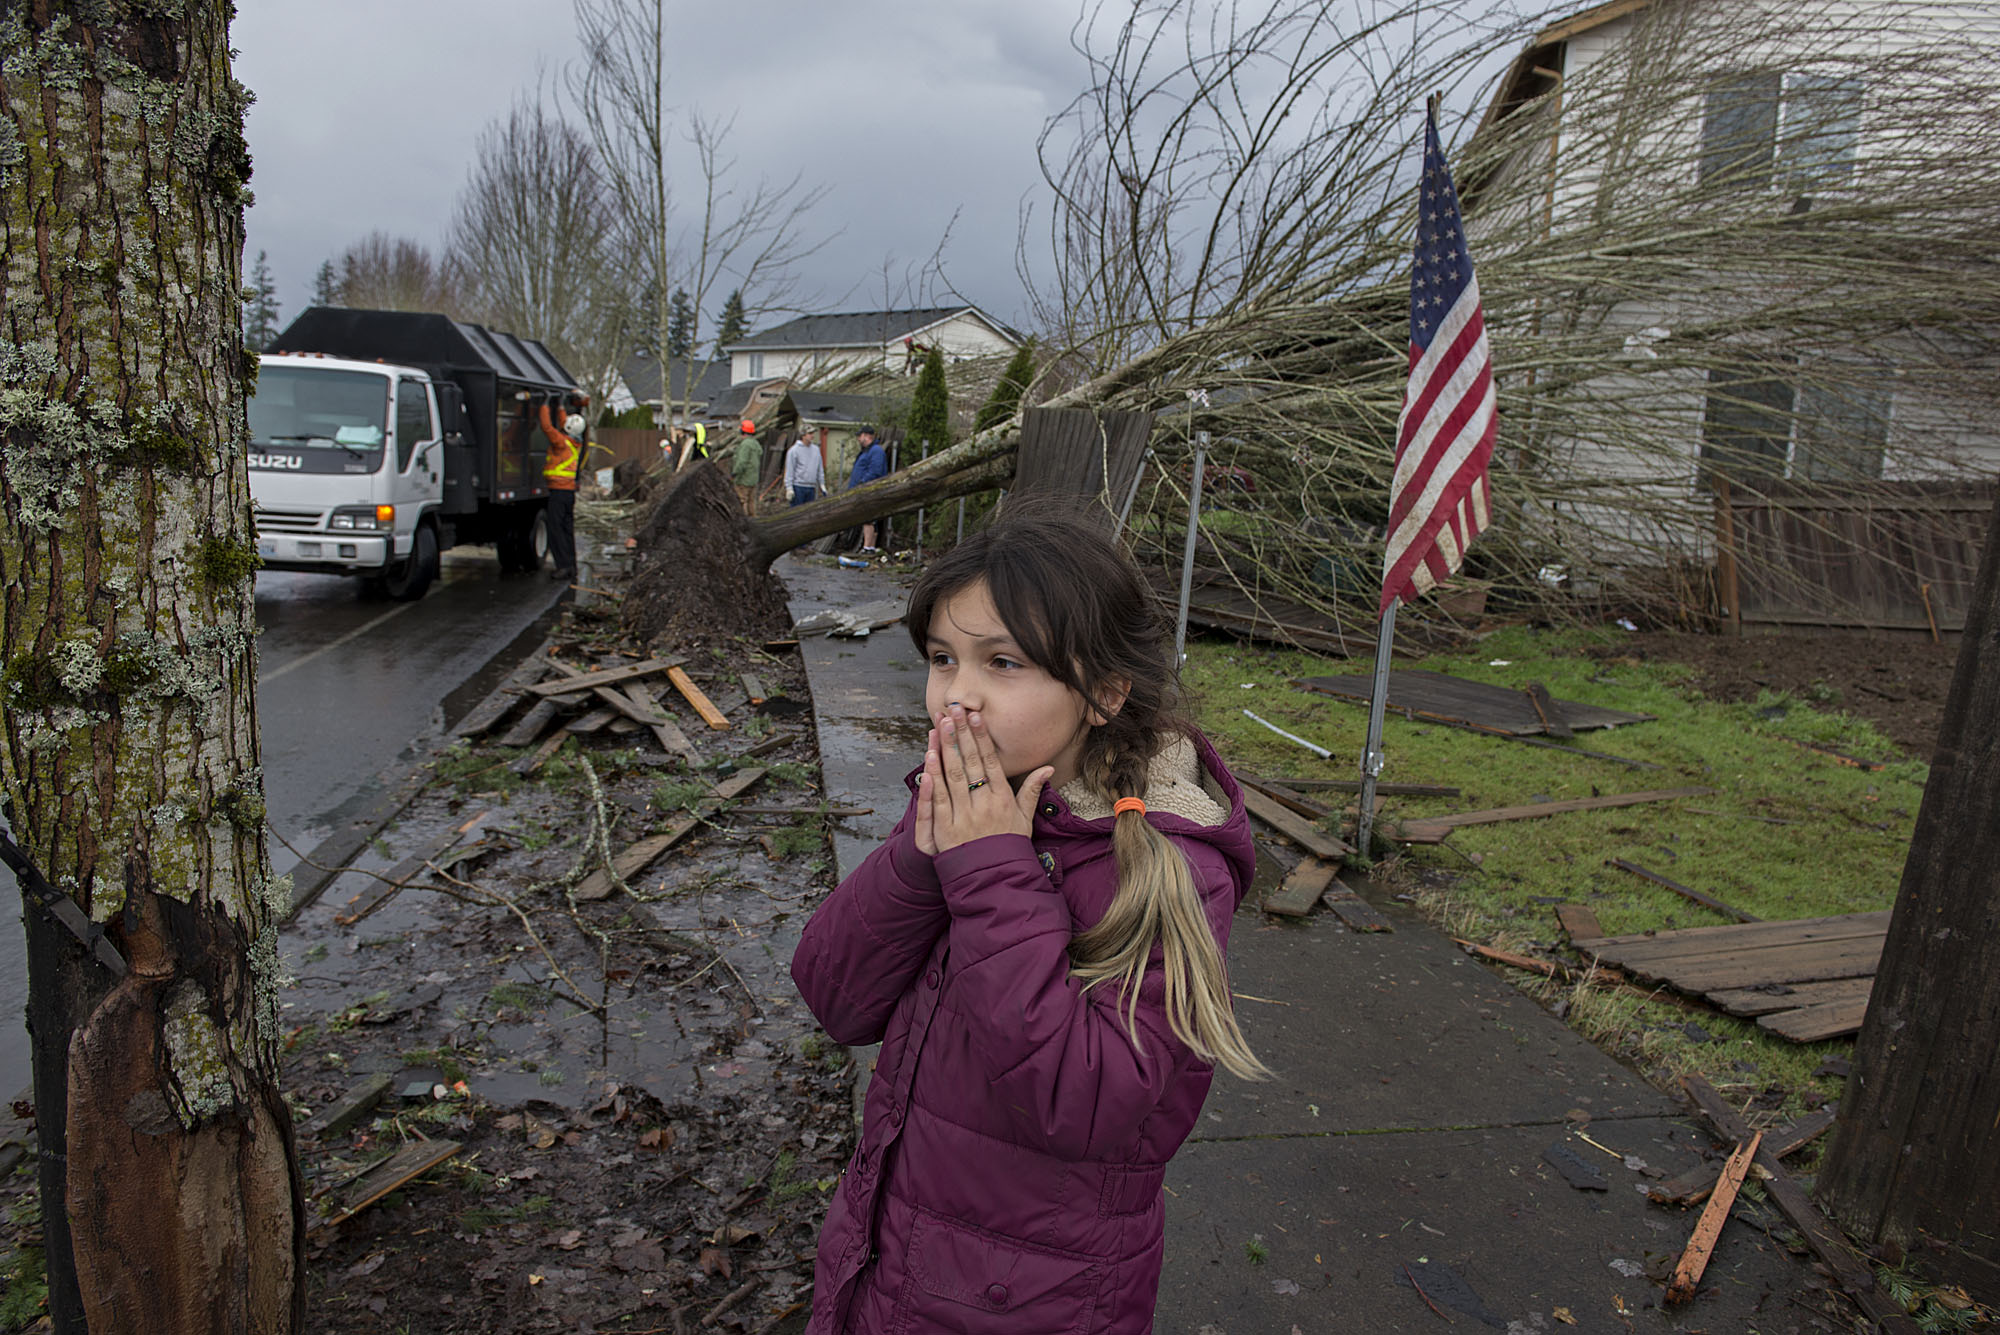 Battle Ground resident Bela Morgan, 9, reacts to seeing damage and debris along Southeast Rasmussen Boulevard from a tornado while viewing the aftermath with her family Thursday afternoon, Dec. 10, 2015.